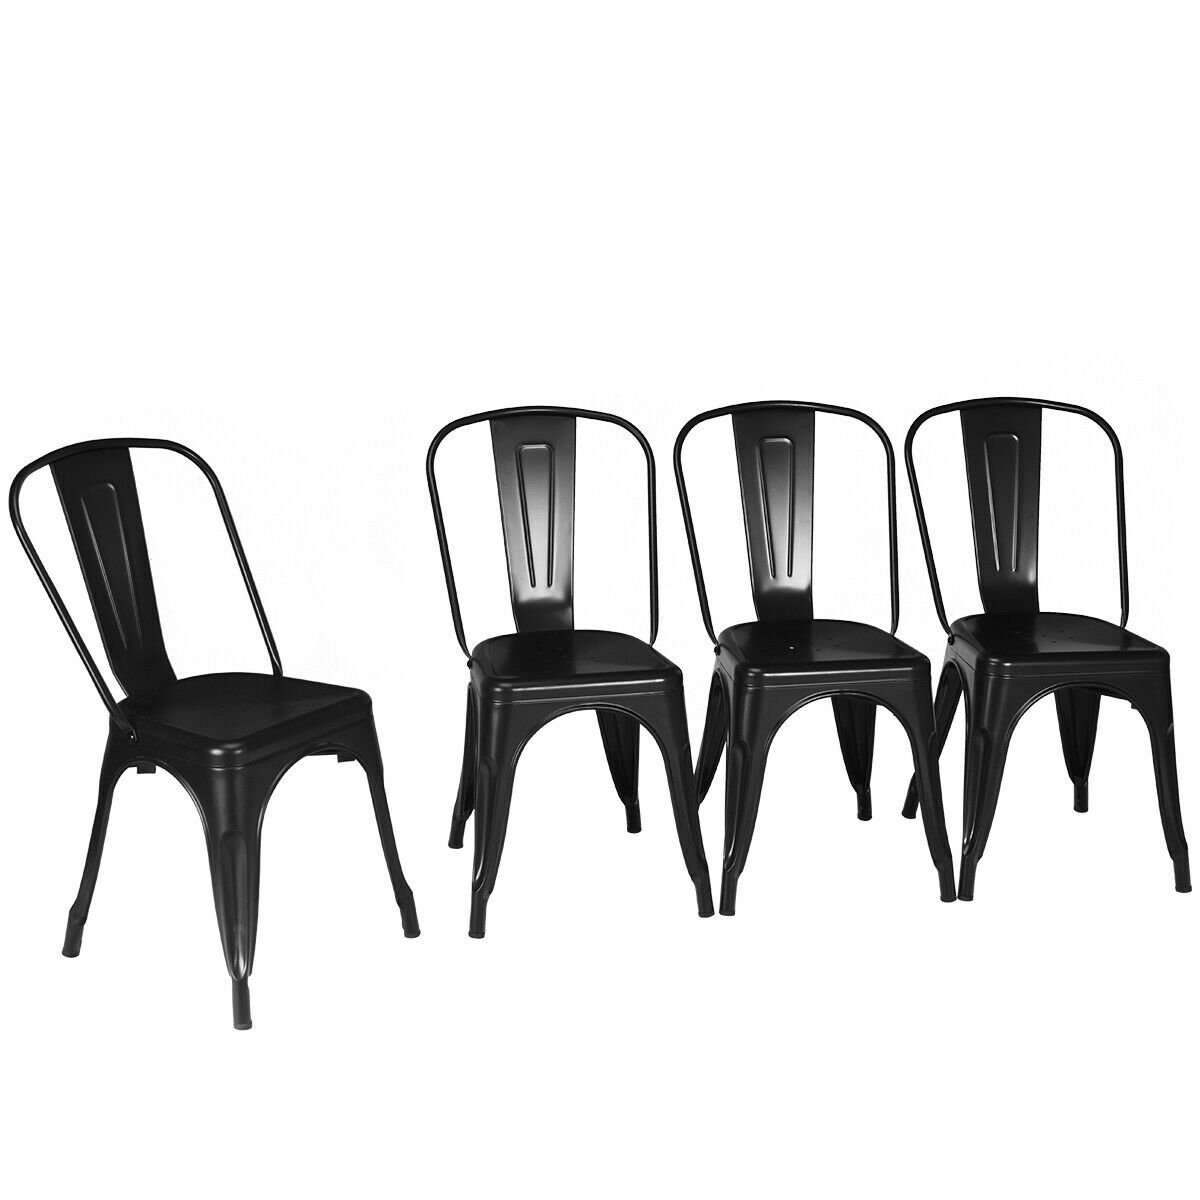 Set Of 4 Metal Dining Chair Stackable Bar Cafe Side Chair Black